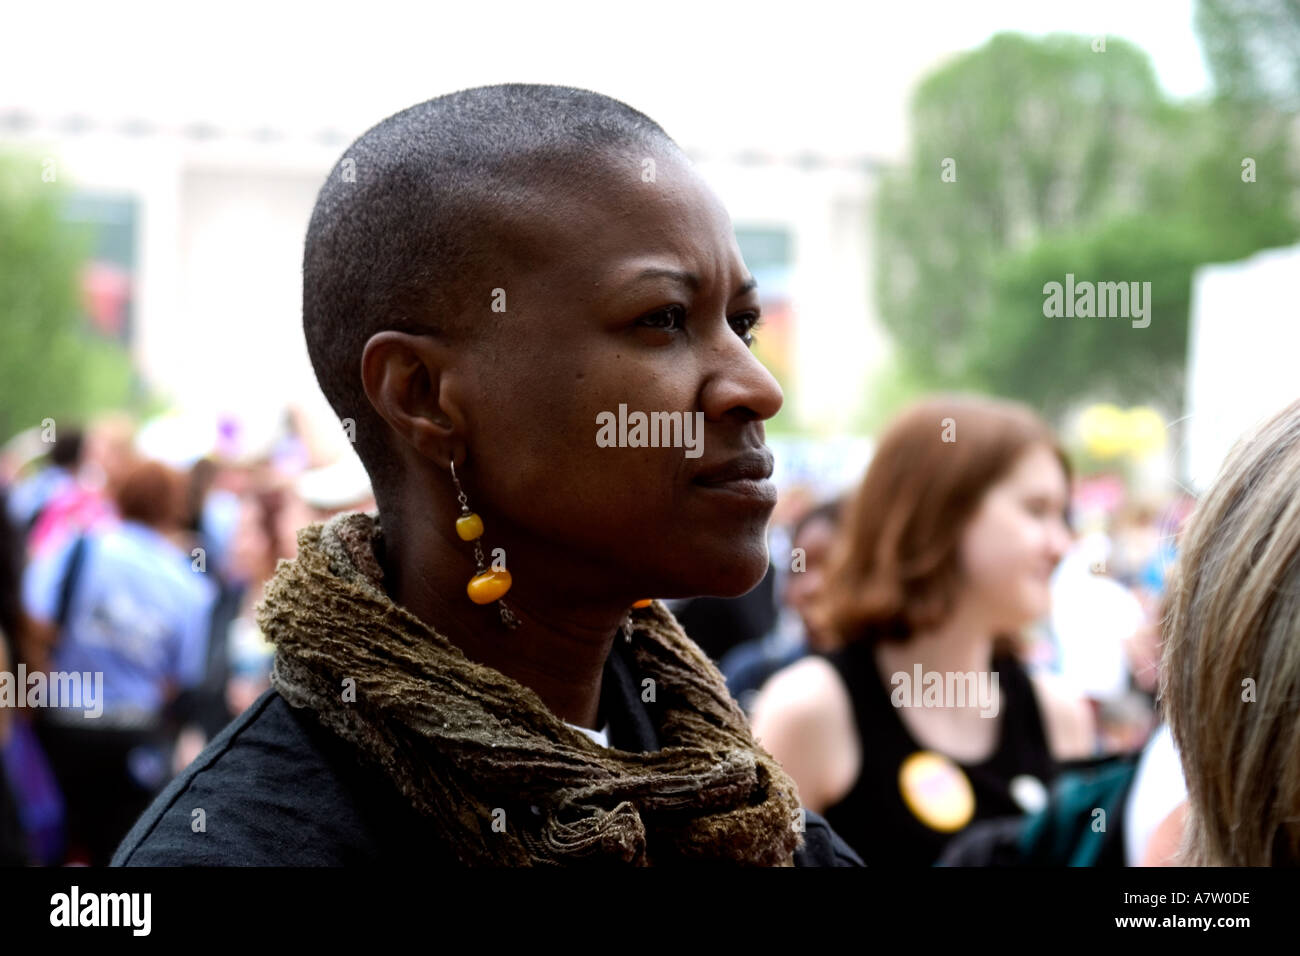 A black woman with a shaved head and amber earrings is seen at the pro choice March on Washington DC April 25 2003 Stock Photo